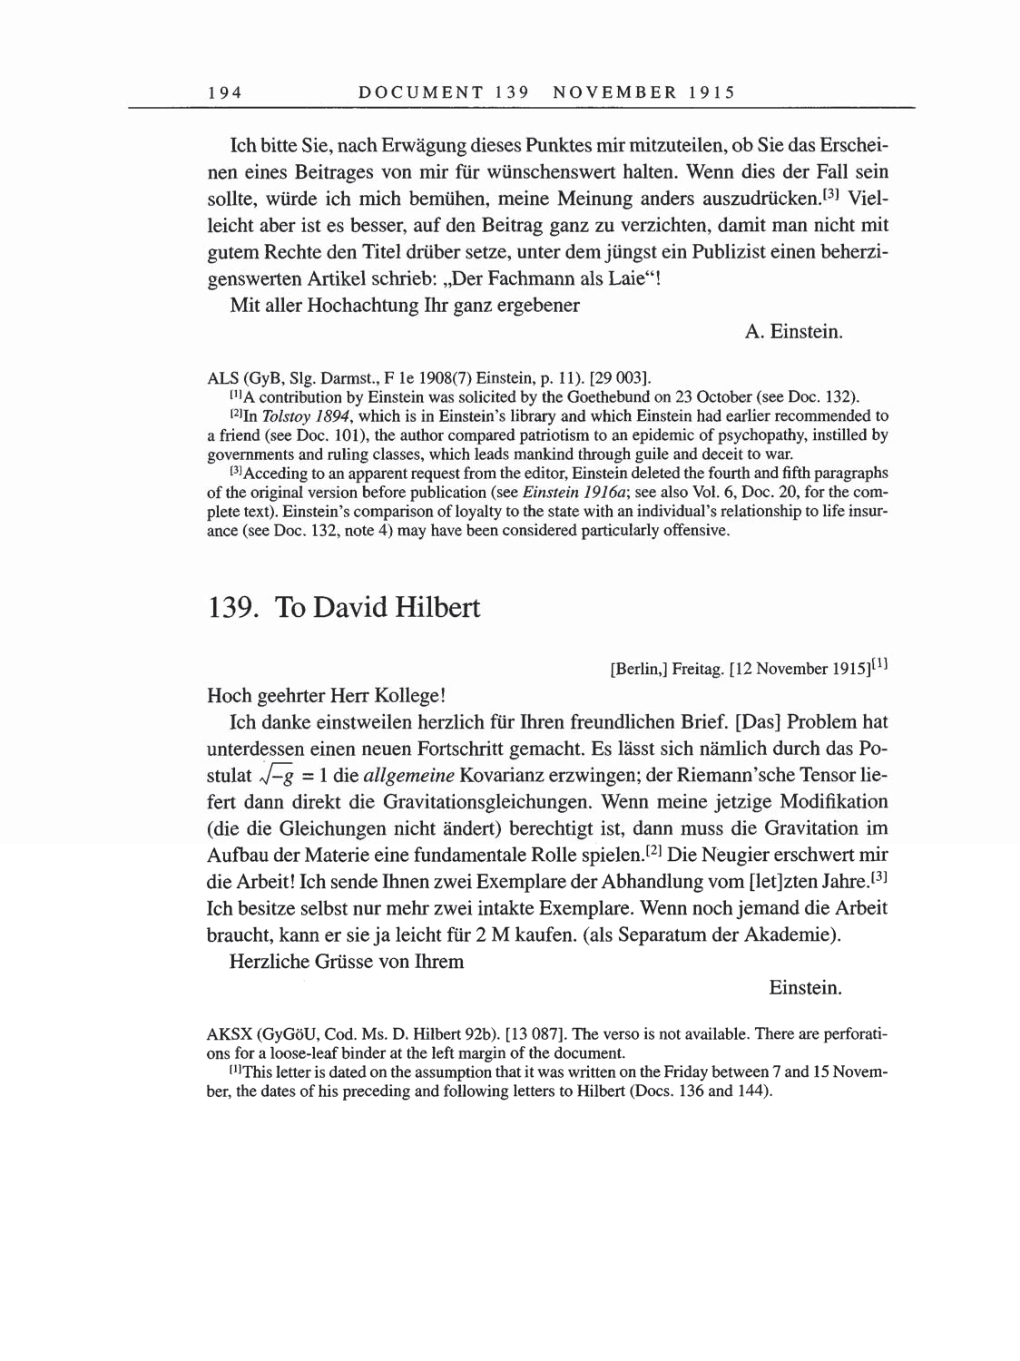 Volume 8, Part A: The Berlin Years: Correspondence 1914-1917 page 194